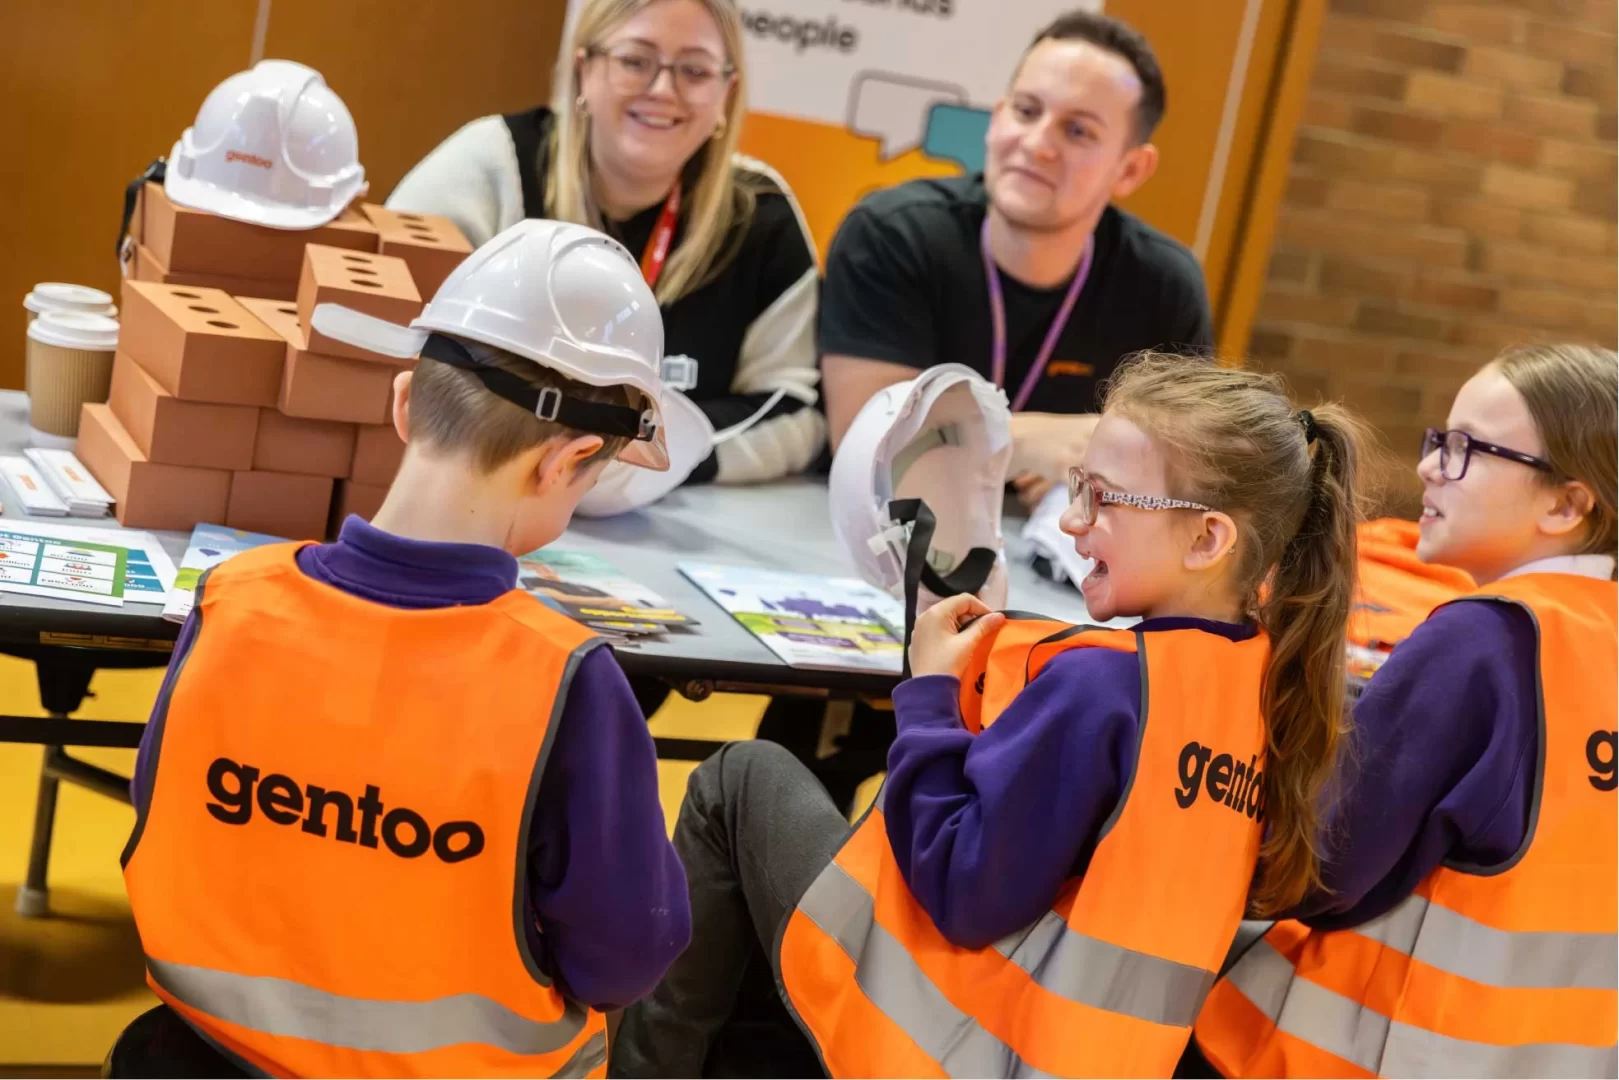 Group of young pupils at the forefront sat at a table, smiling whiling trying on safety gear such as hard hats and high-vis' jackets, in the background are staff from Gentoo smiling